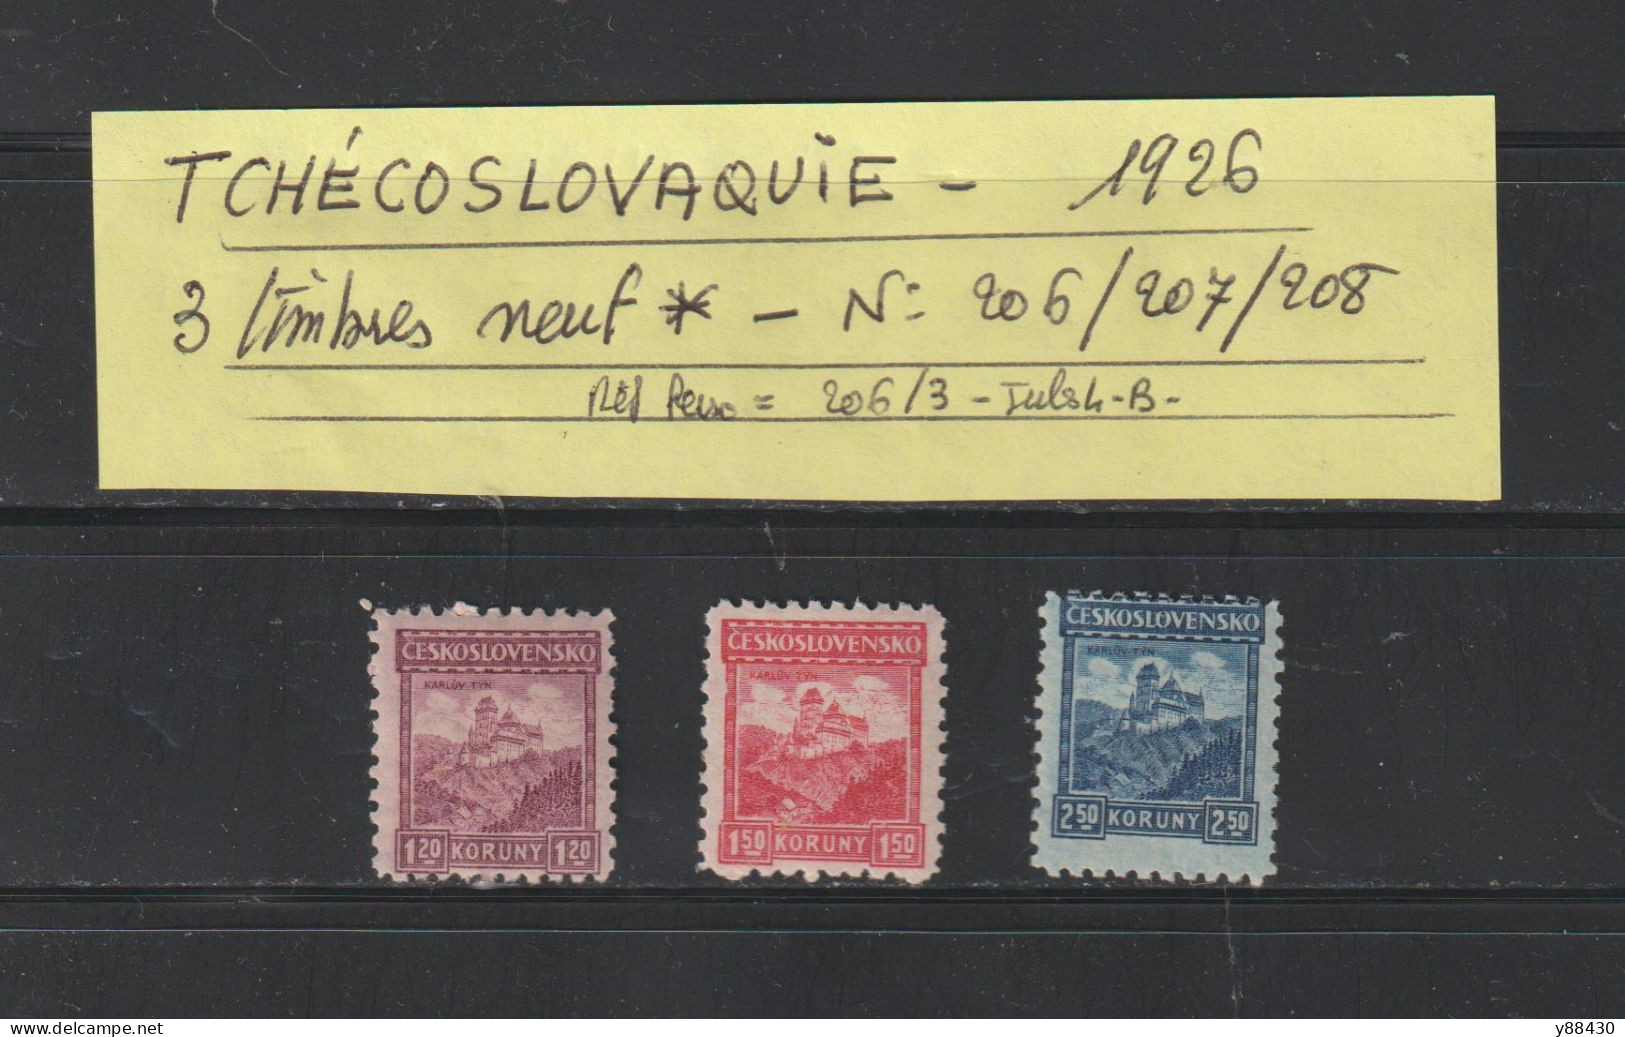 TCHÉCOSLOVAQUIE - 3 Timbres Neuf * De 1926 - N° 206 / 20 7 / 208 - Château De Karluv Tyn  - 2 Scan - Unused Stamps